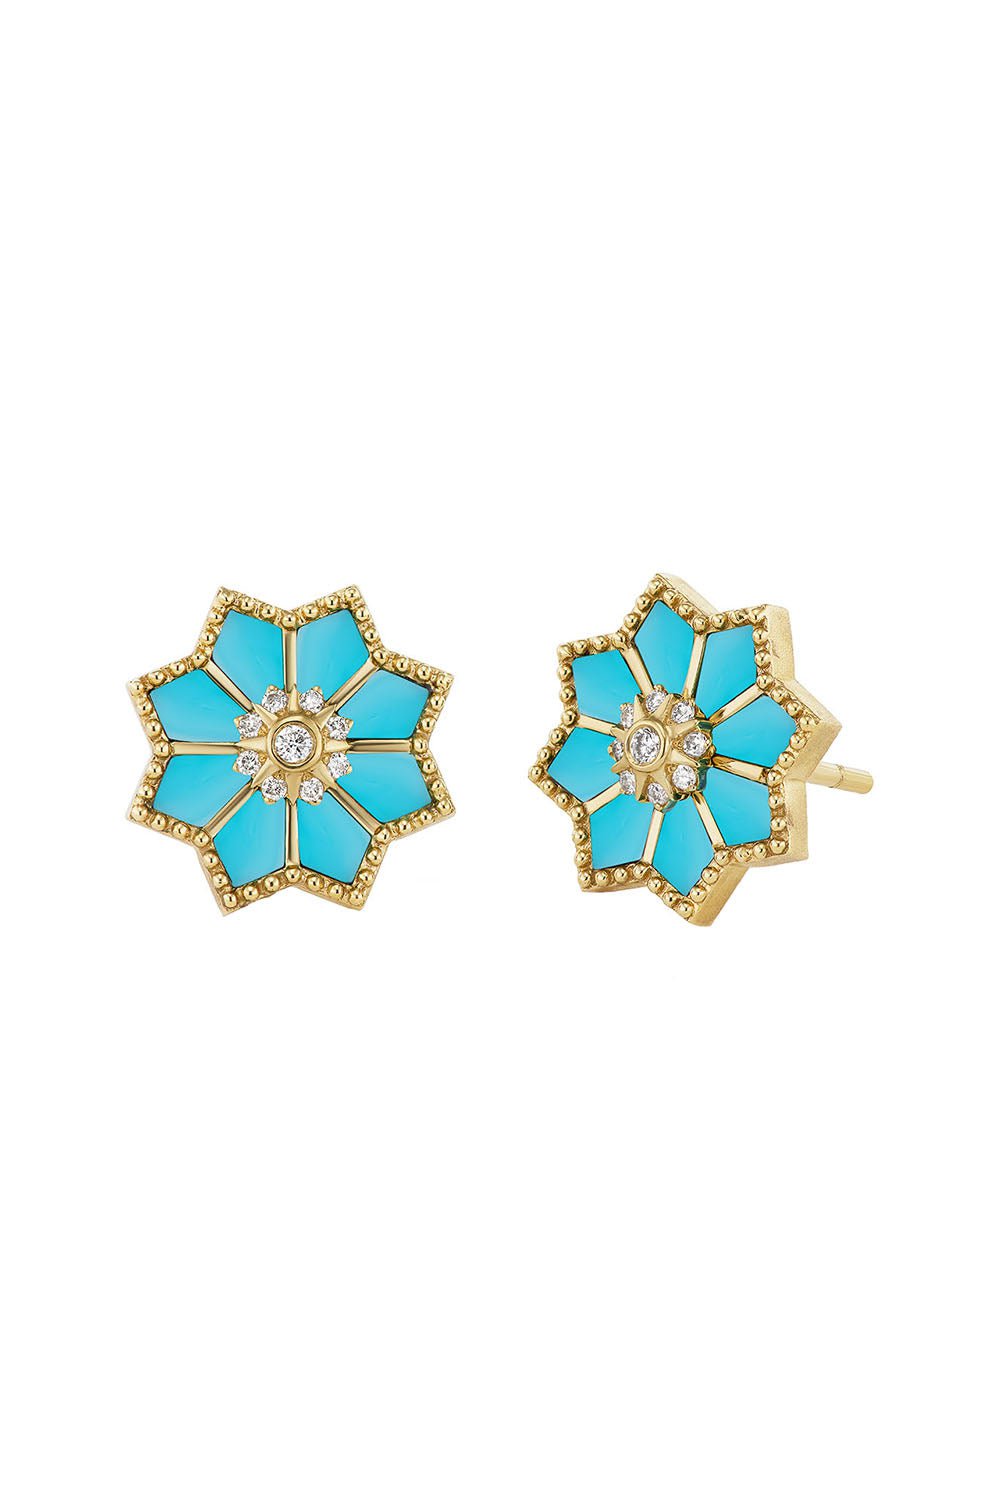 ORLY MARCEL-FEZ TURQUOISE STUD EARRINGS-YELLOW GOLD